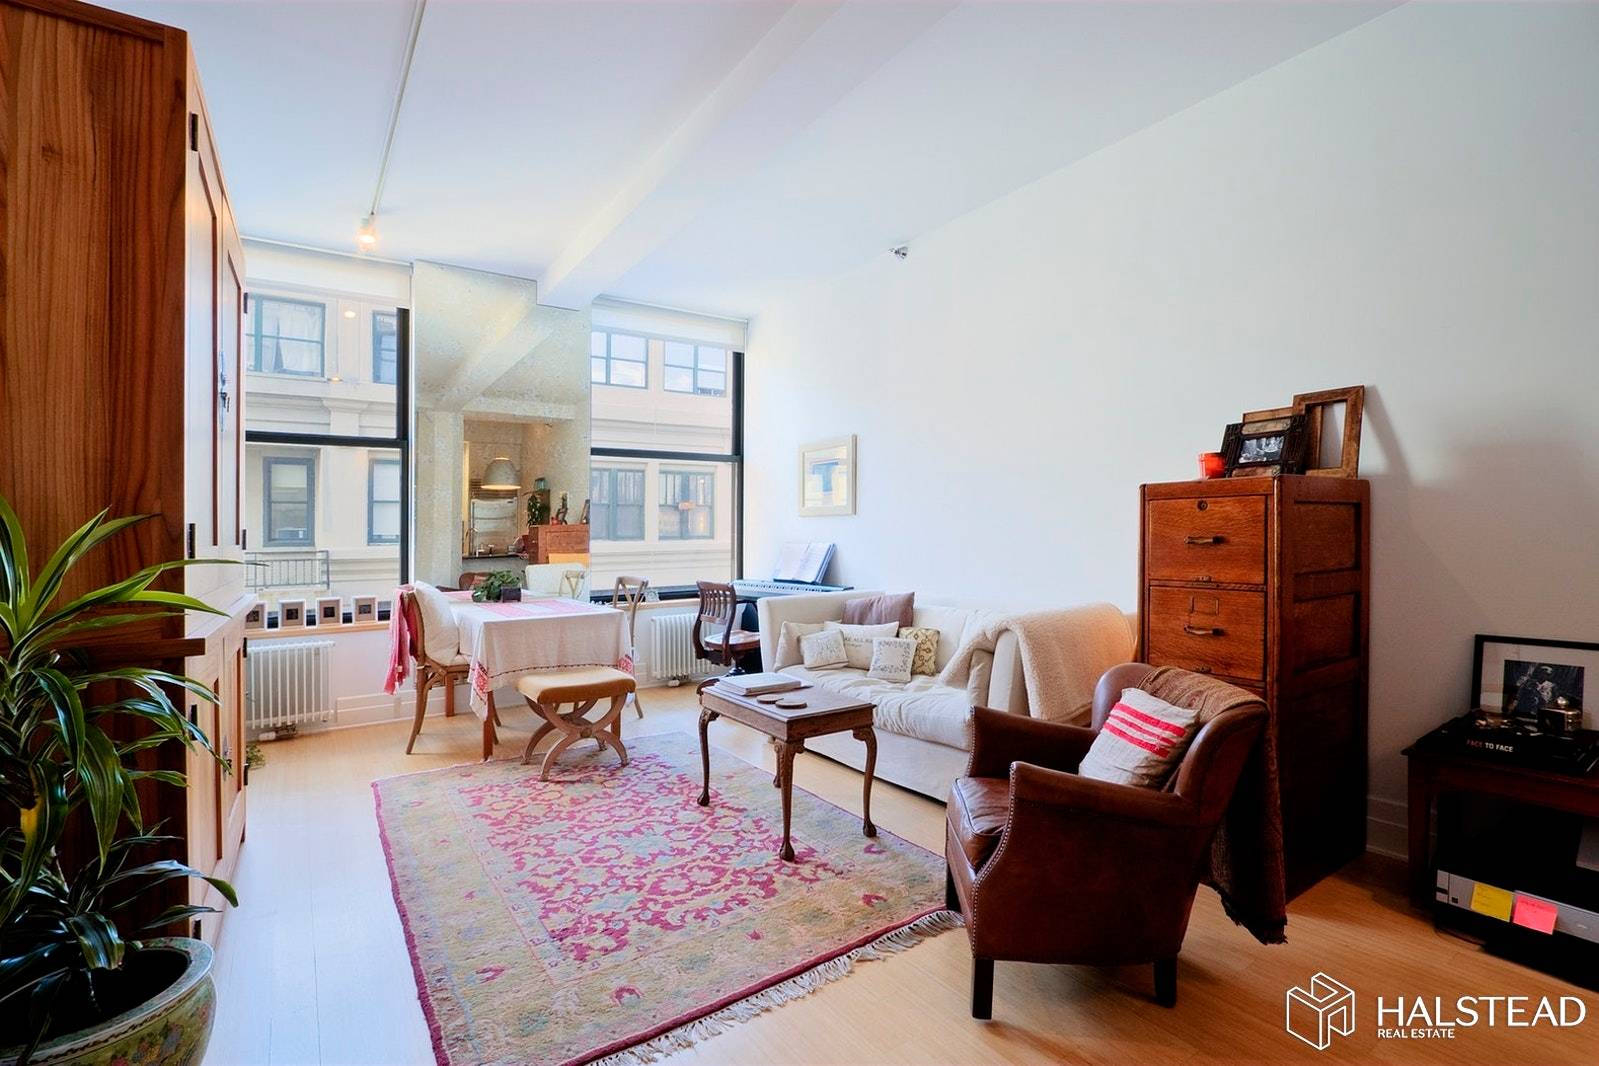 NO FEE ! 1BD 1BT for rent in one of Dumbo's premier condo, 70 Washington, with its oversized windows and 11ft.